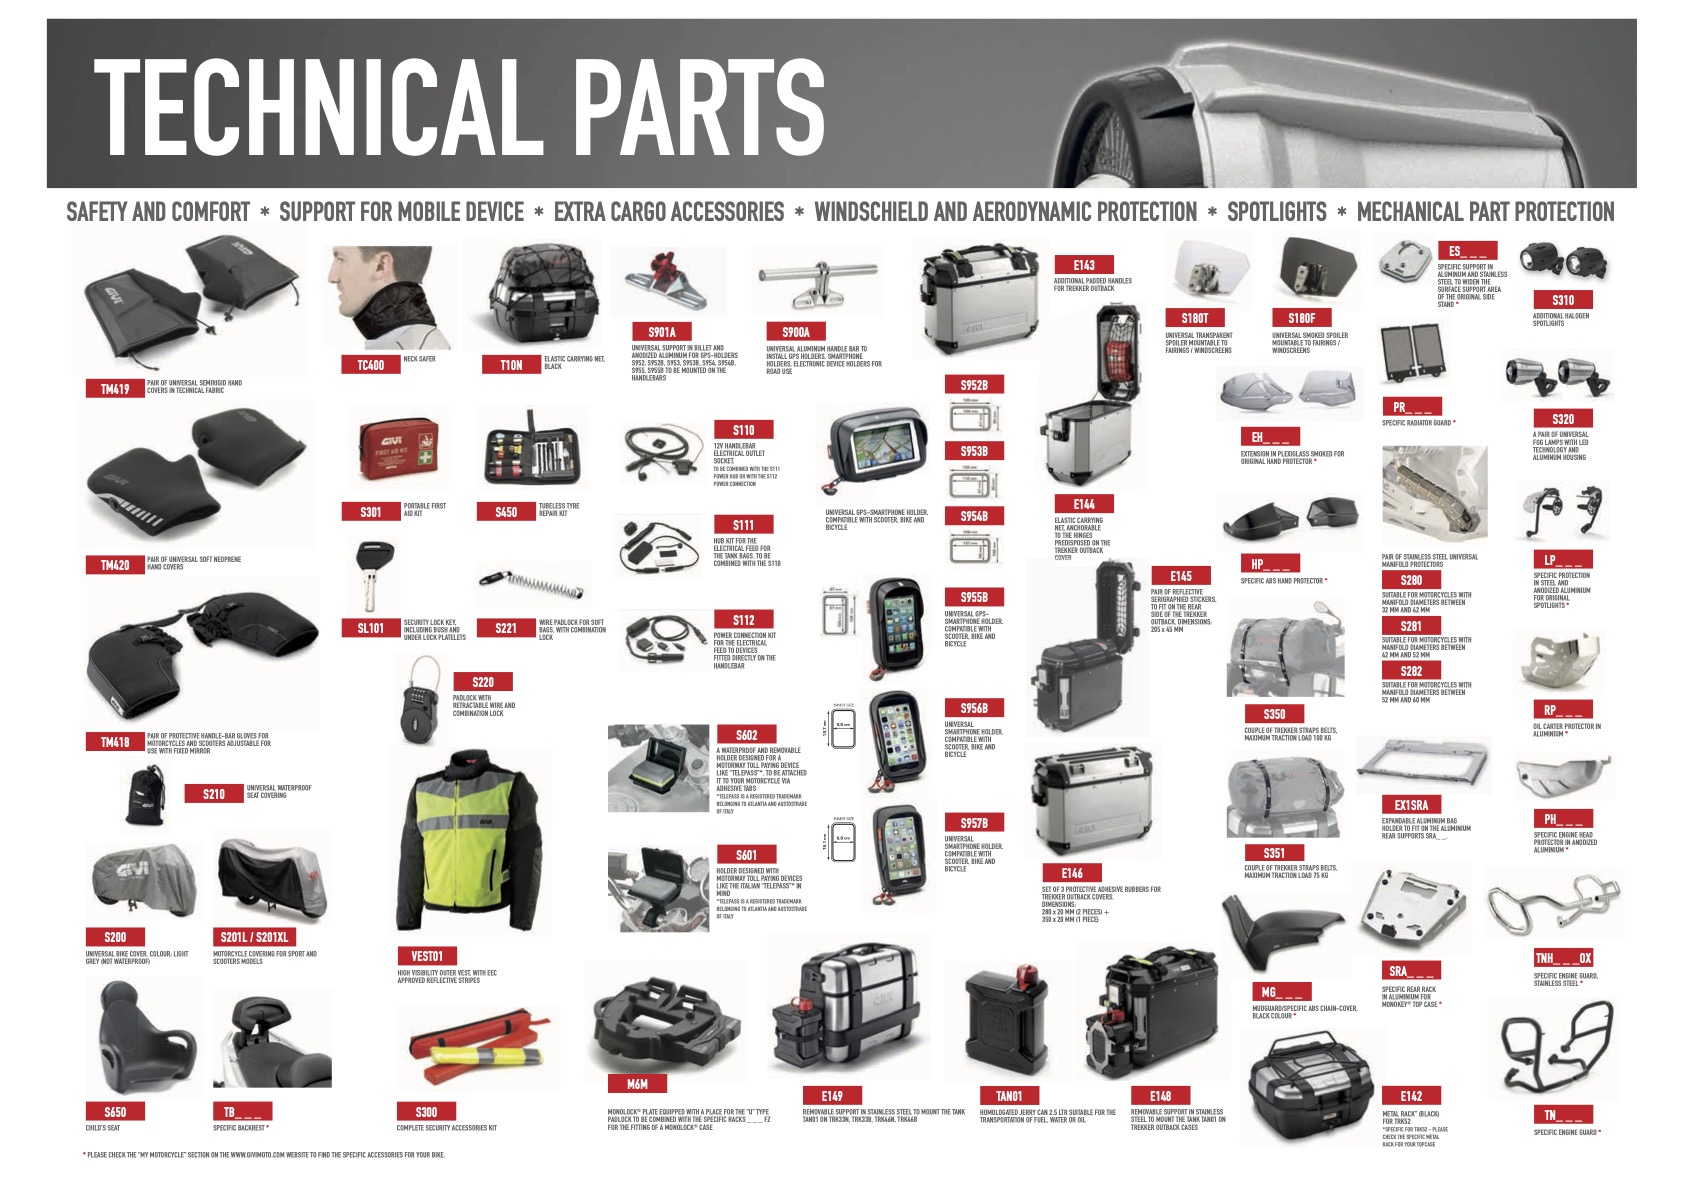 GIVI technical parts and motorcycle accessories